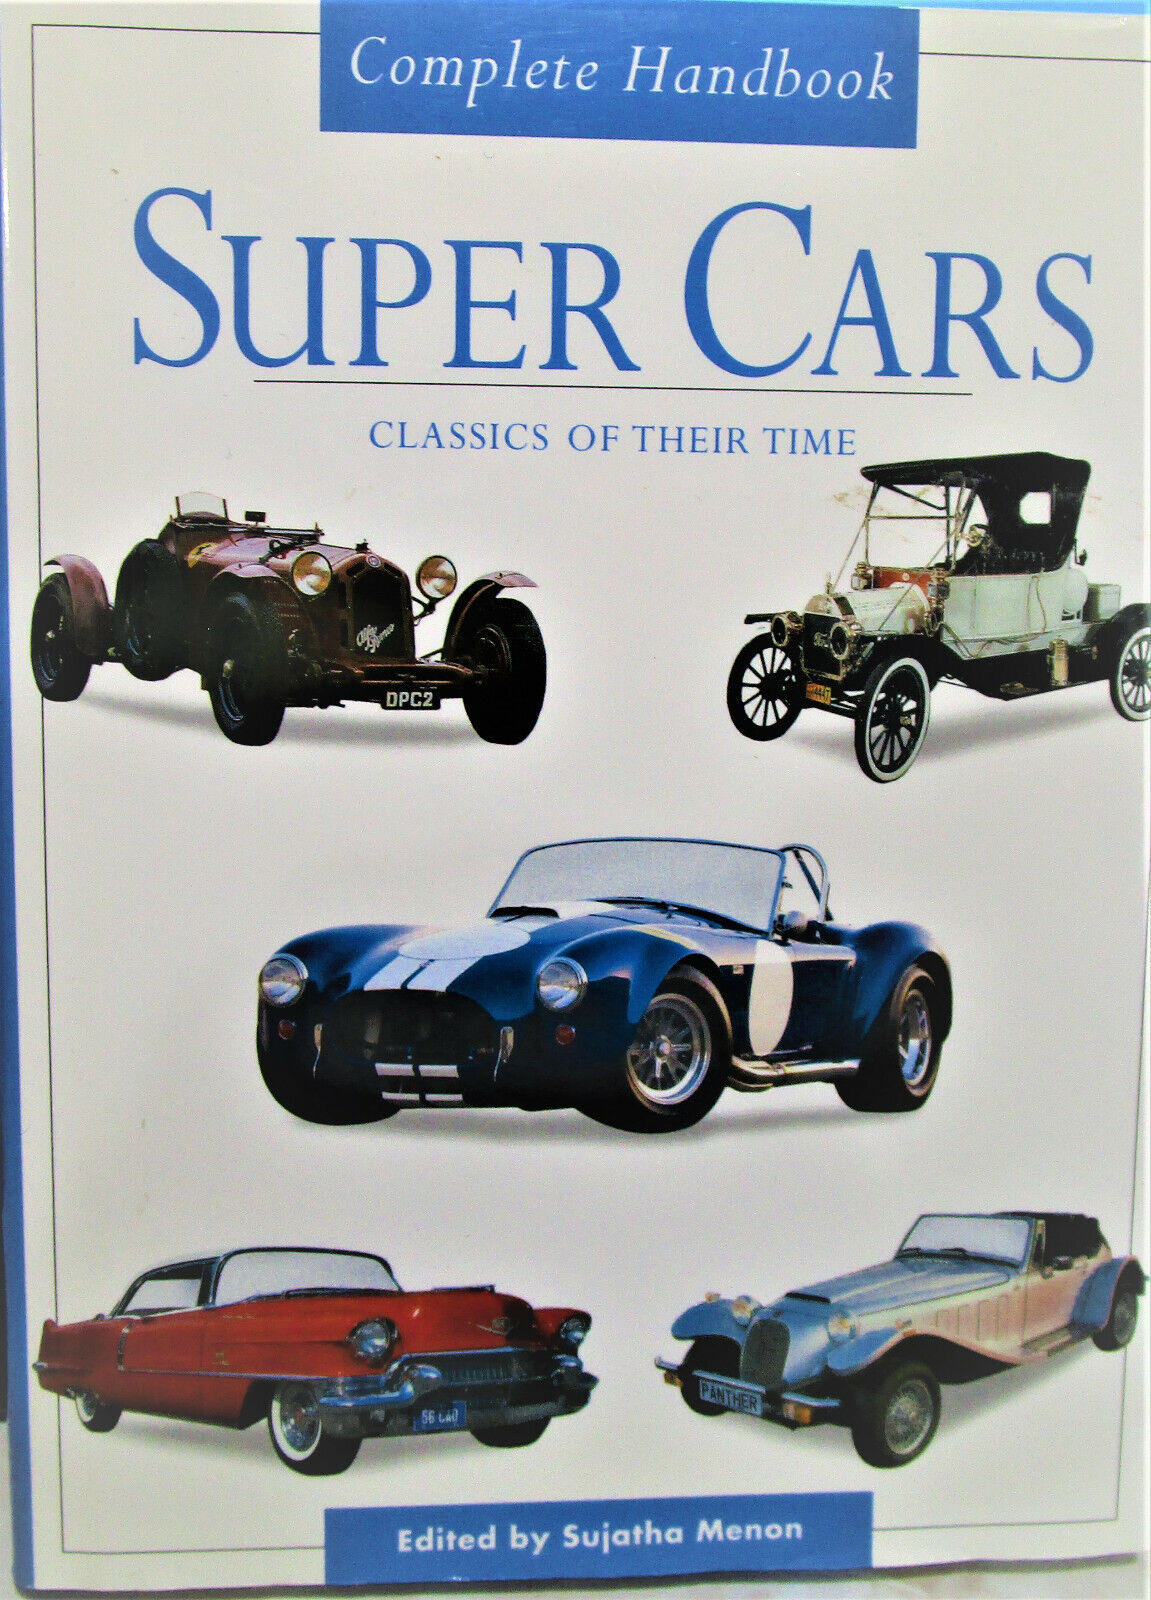 Book Titled “complete Handbook Of Super Cars-classics Of Their Time”